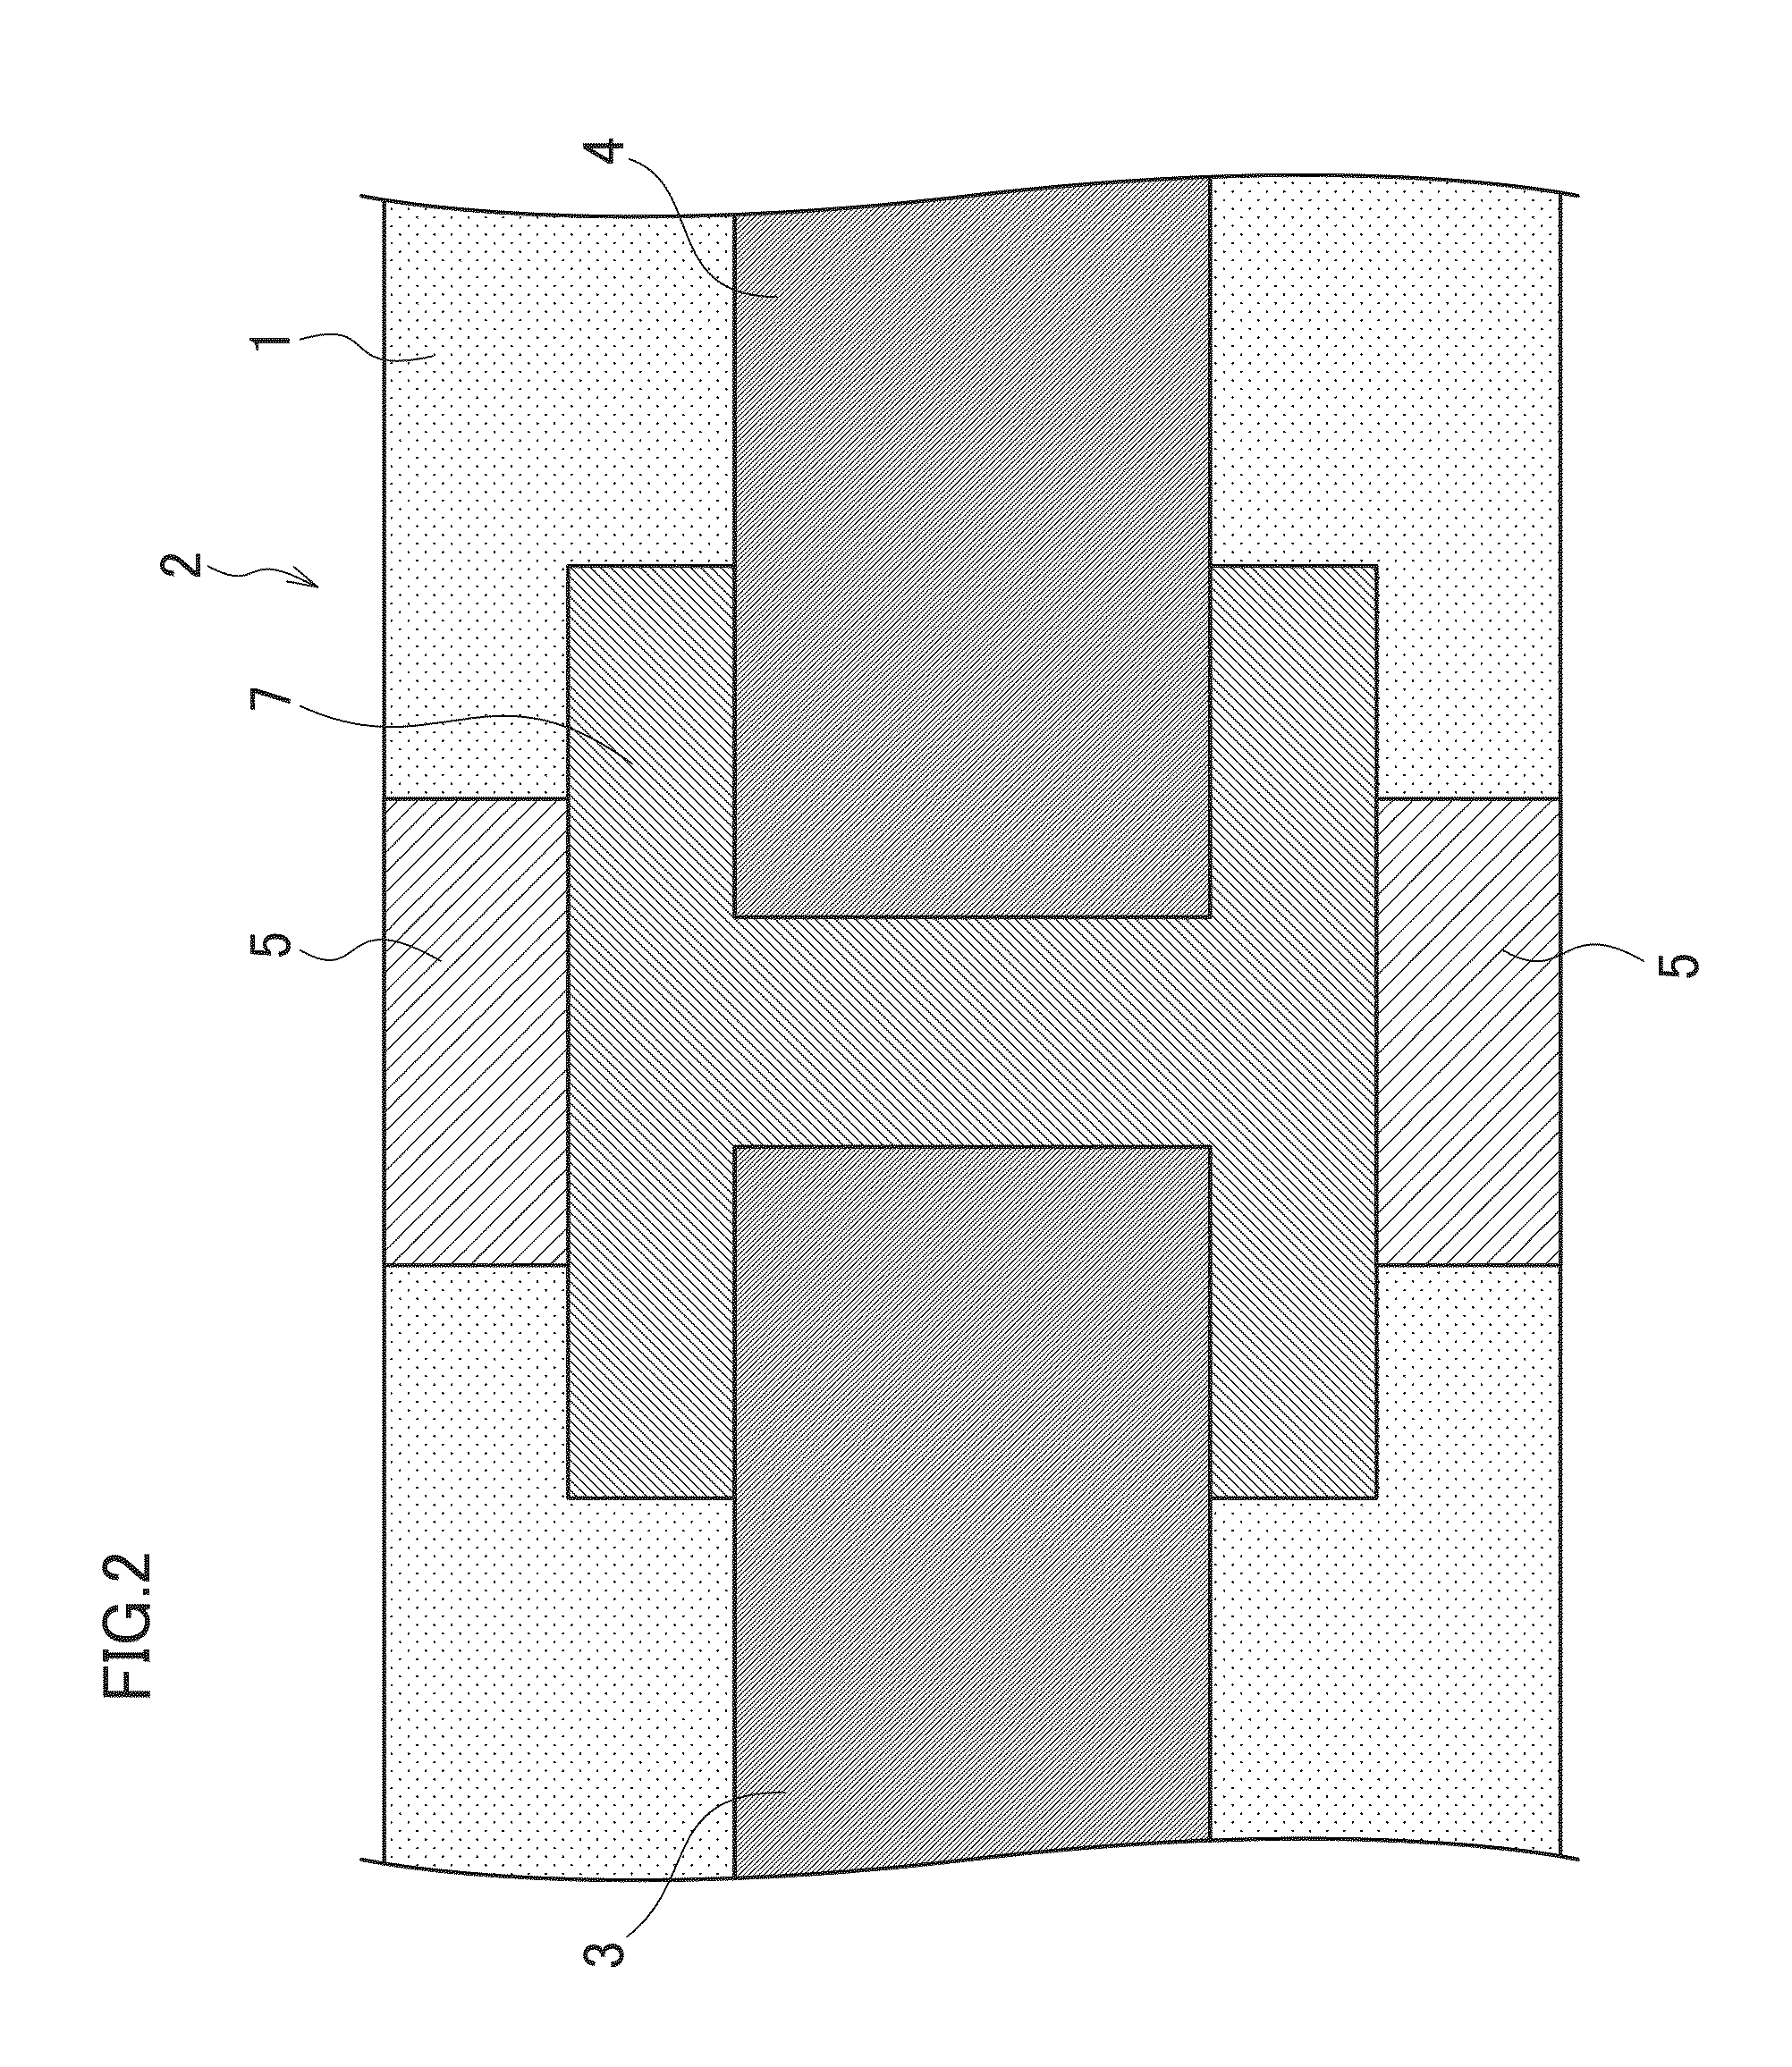 Conductive pattern forming method and conductive pattern forming system